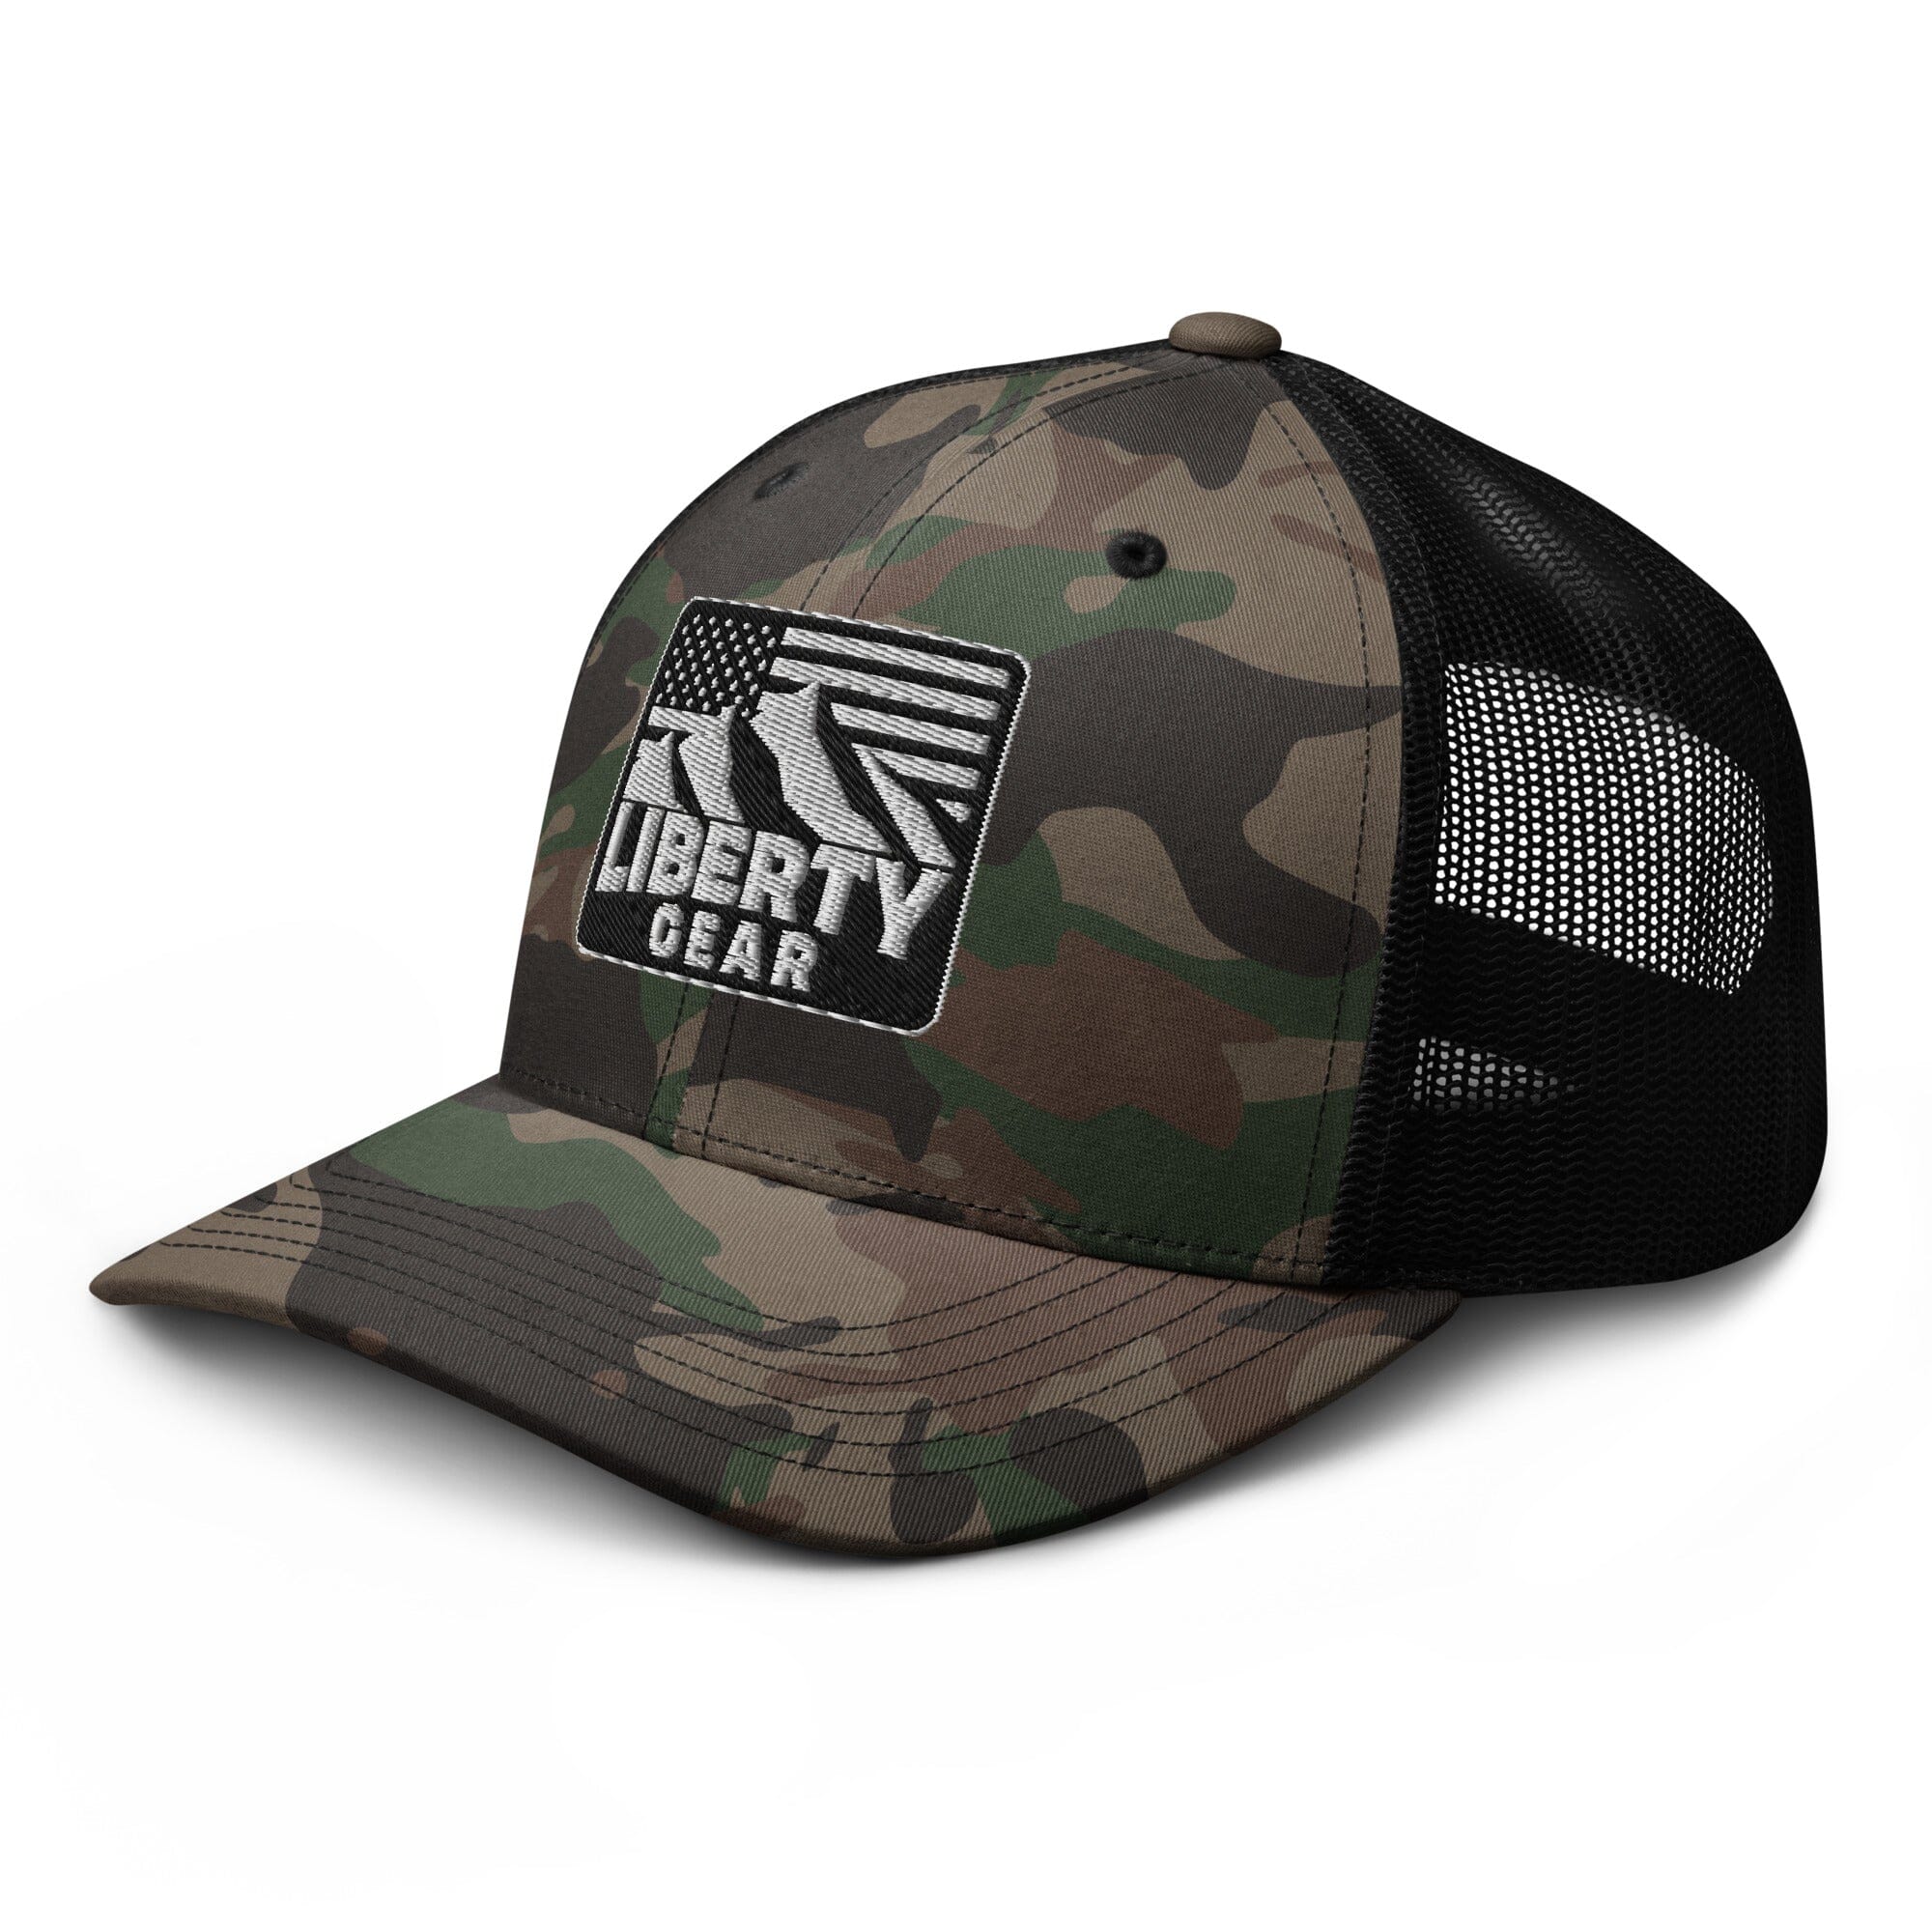 Experience the Ultimate Outdoor Adventure with Liberty Gear Camo Hat